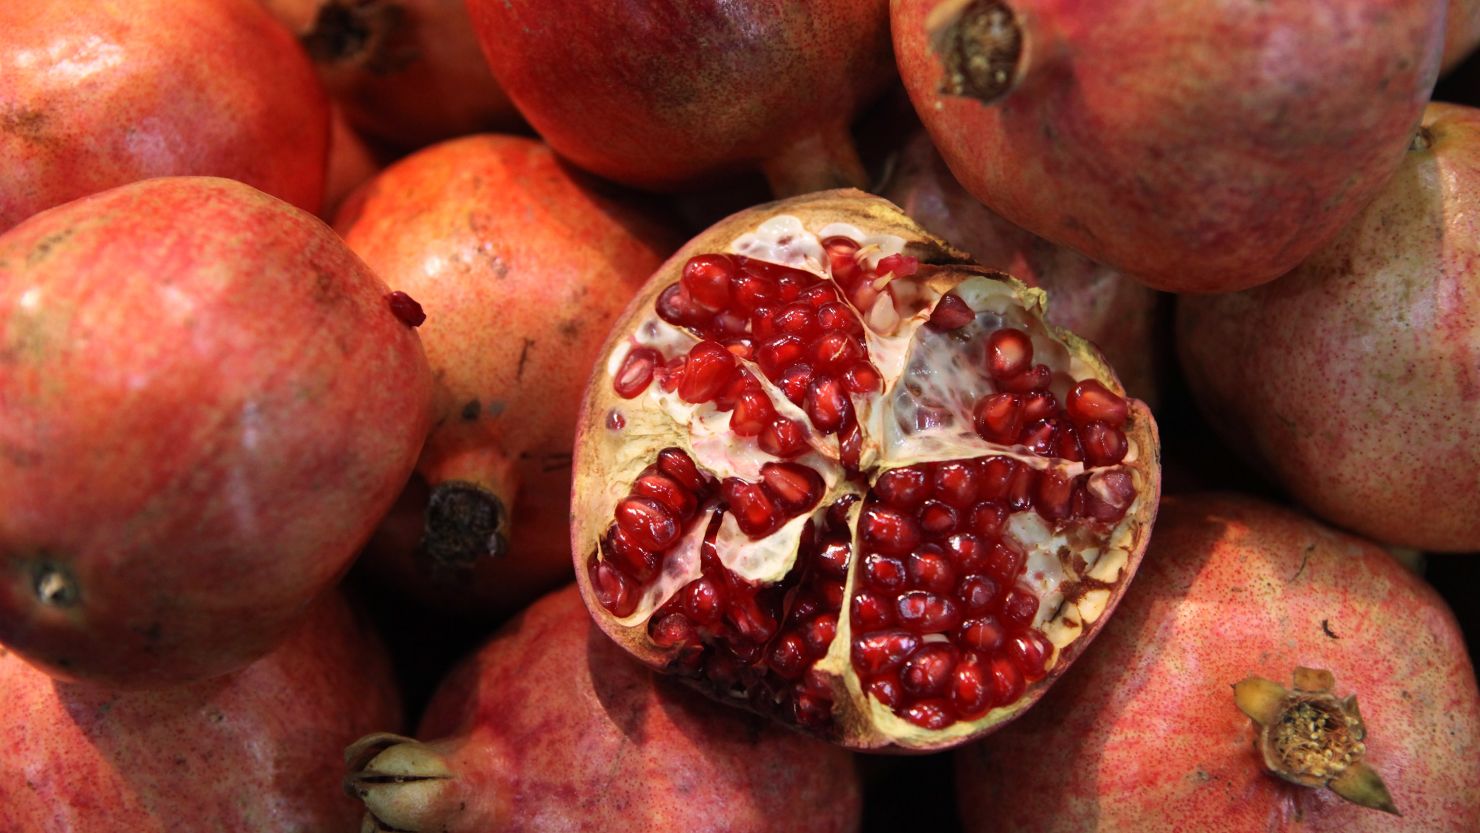 Pomegranate seeds from Turkey in a frozen fruit mix may be the cause of a hepatitis A outbreak.